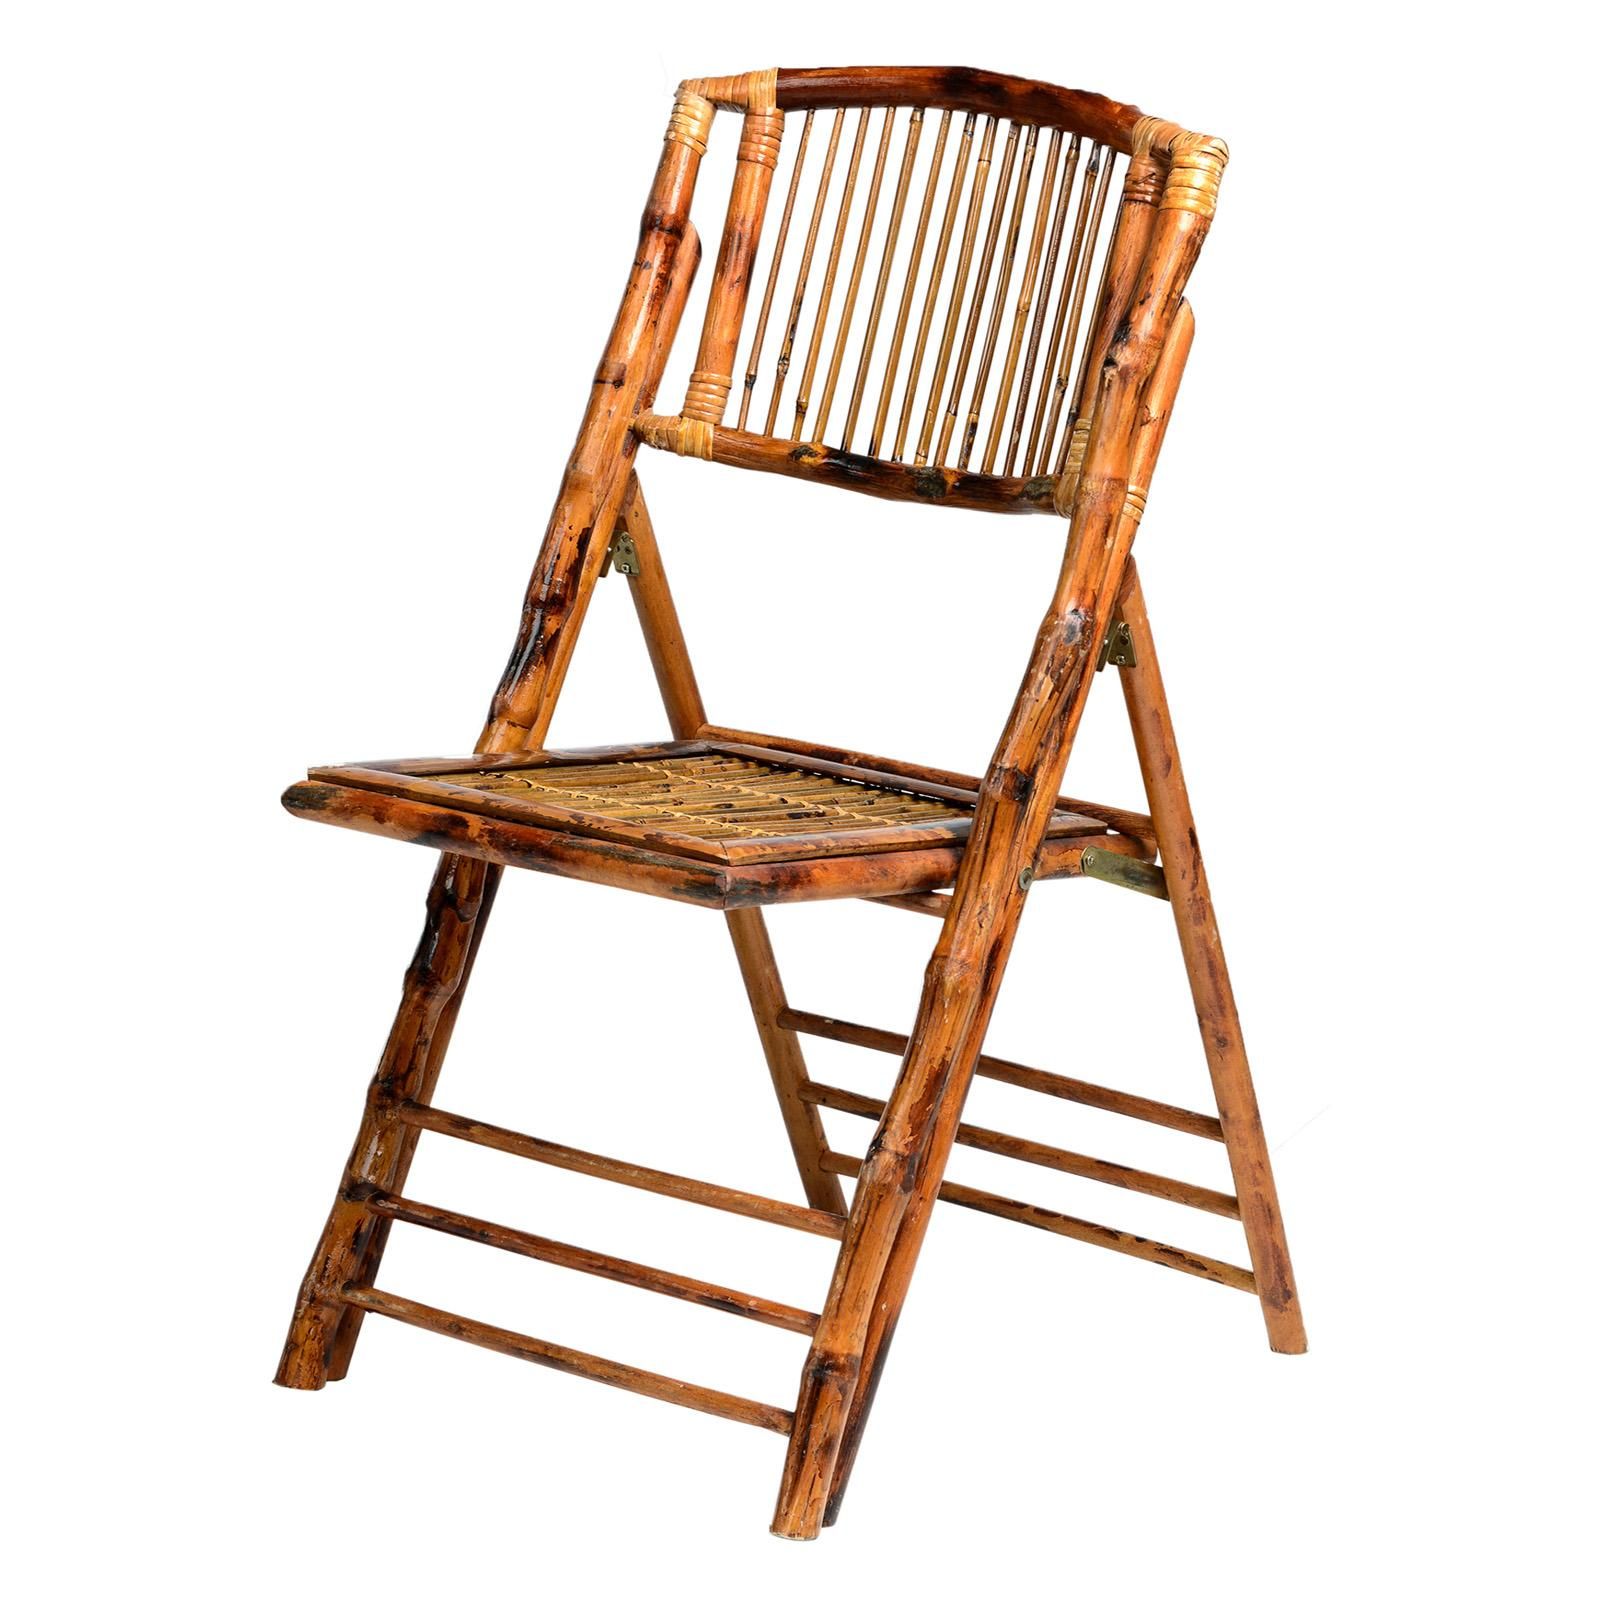 Commercial Seating Products American Classic Bamboo Folding Chair | Hayneedle